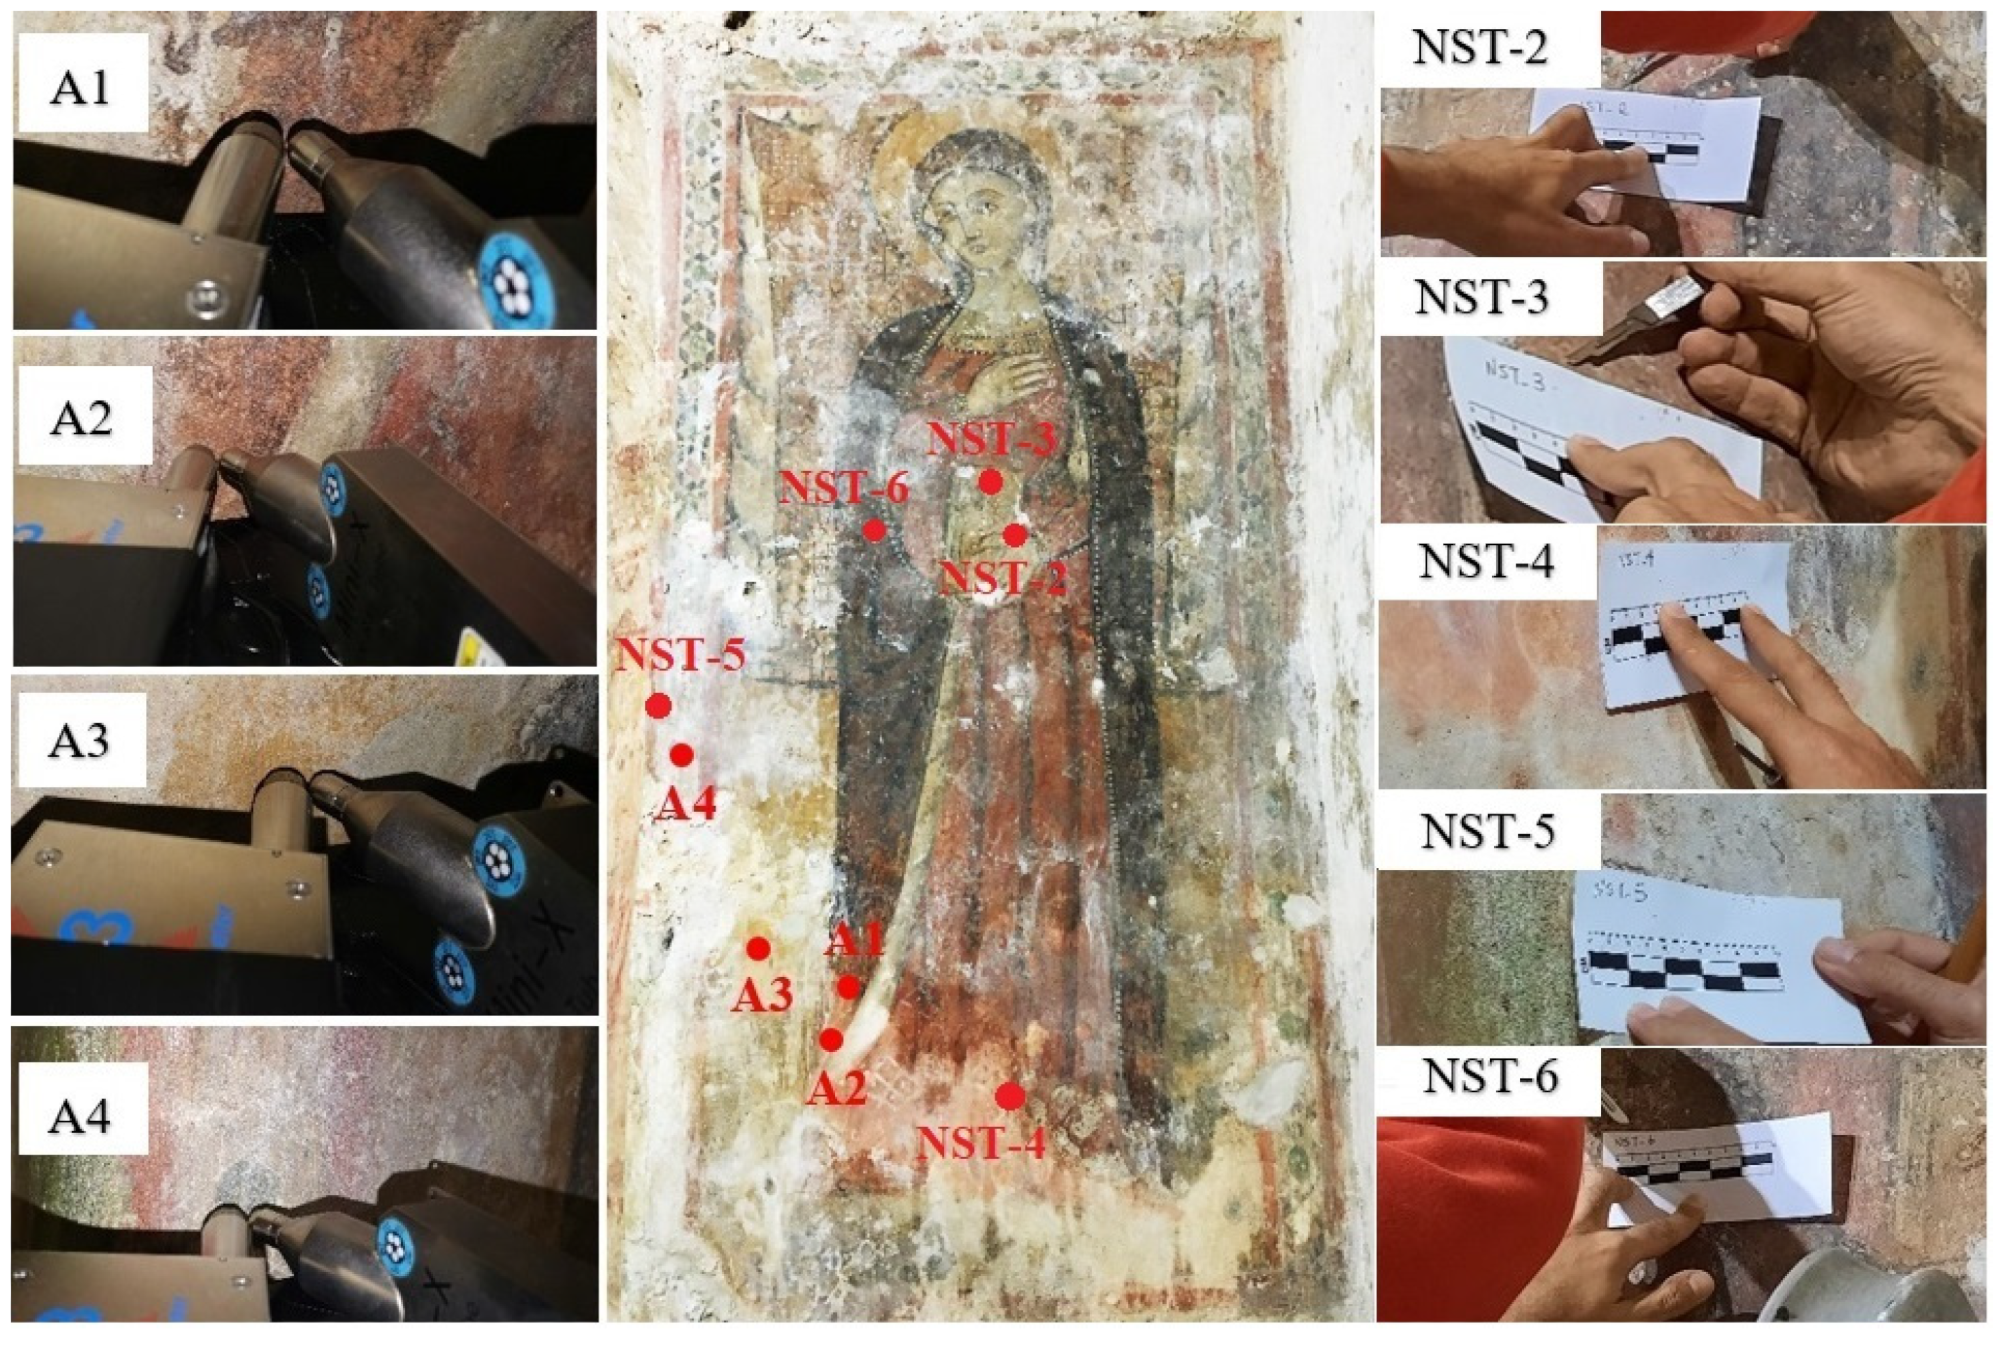 Sampling points for the Mural painting depicting the “Virgin” by in situ methods (ID: A) and laboratory-based analysis (ID: NST).